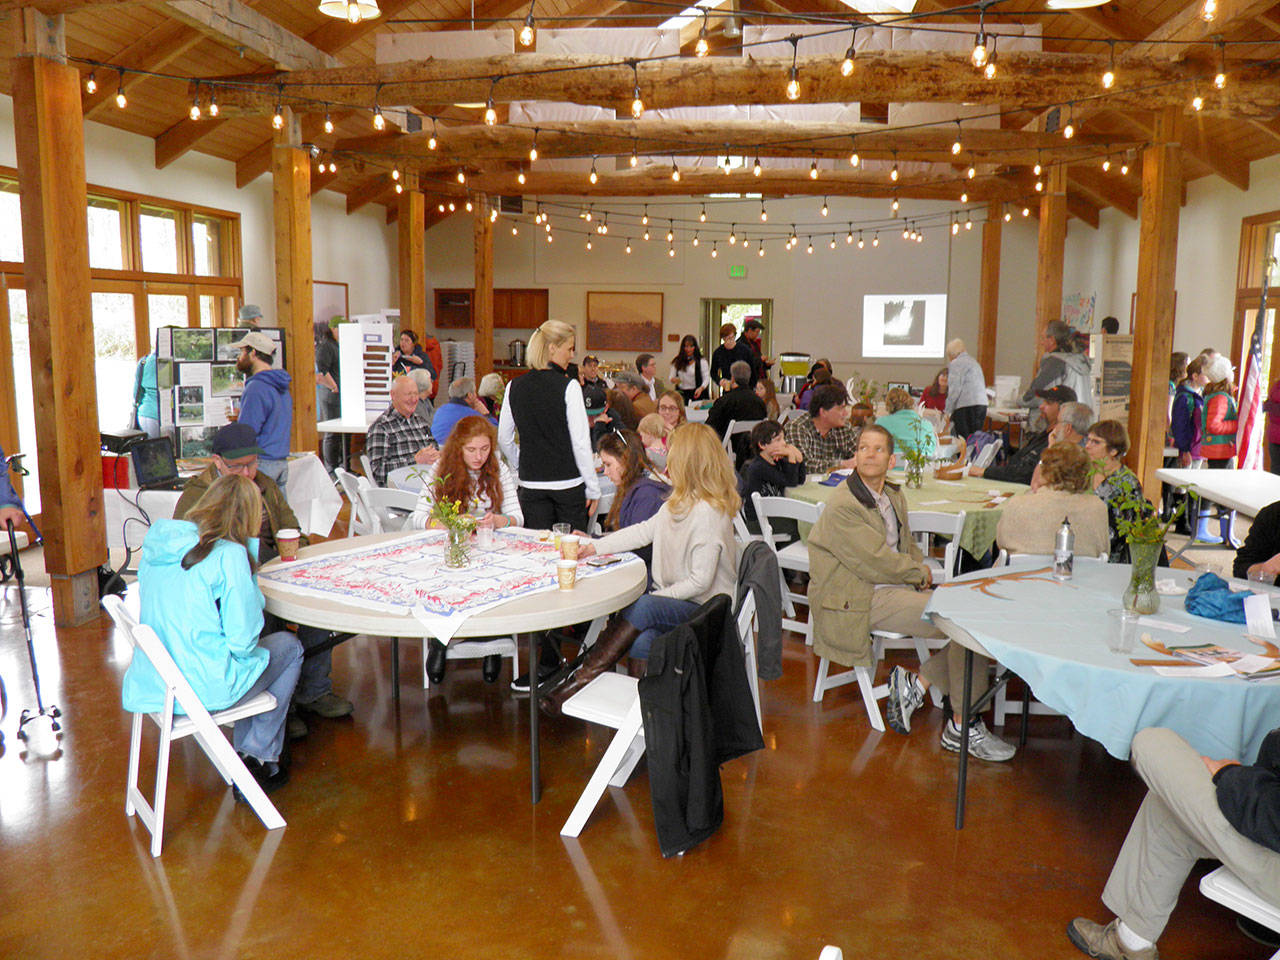 Attendees of the celebration gathered at the Meadowbrook Farm Interpretive Center for dinner. (Courtesy Photo)